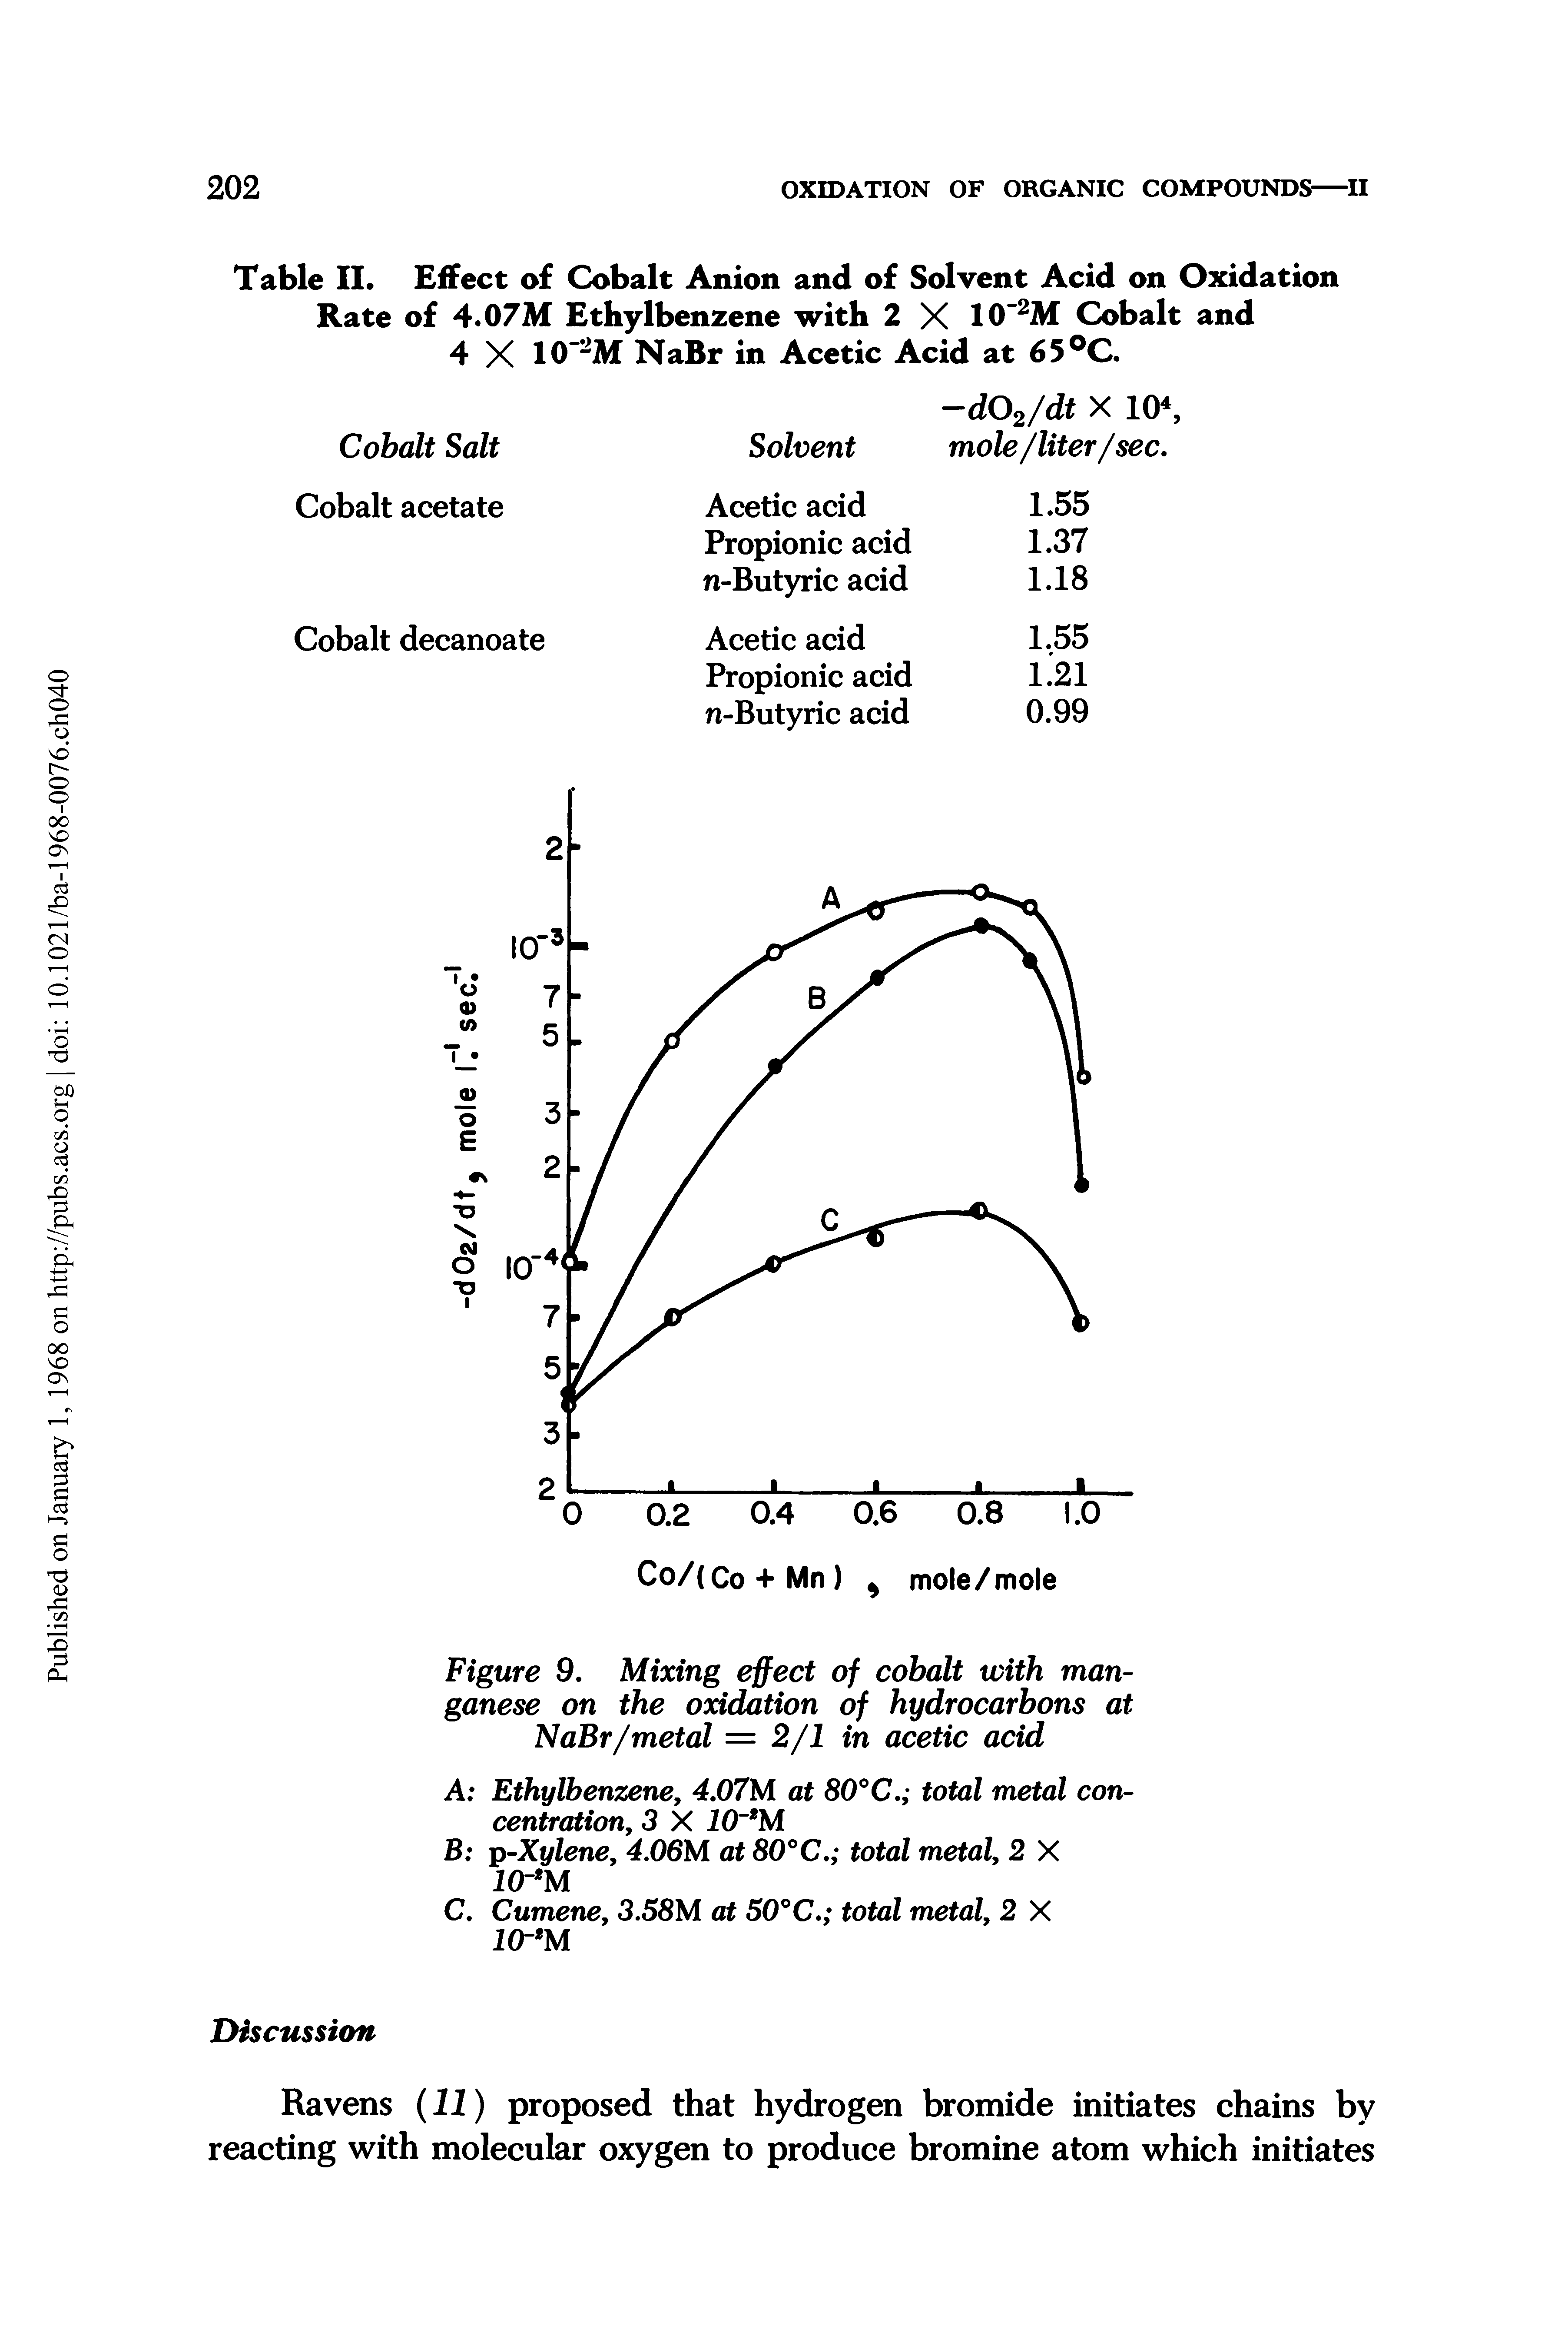 Figure 9. Mixing effect of cohalt with manganese on the oxidation of hydrocarbons at NaBr/metal = 2/1 in acetic acid...